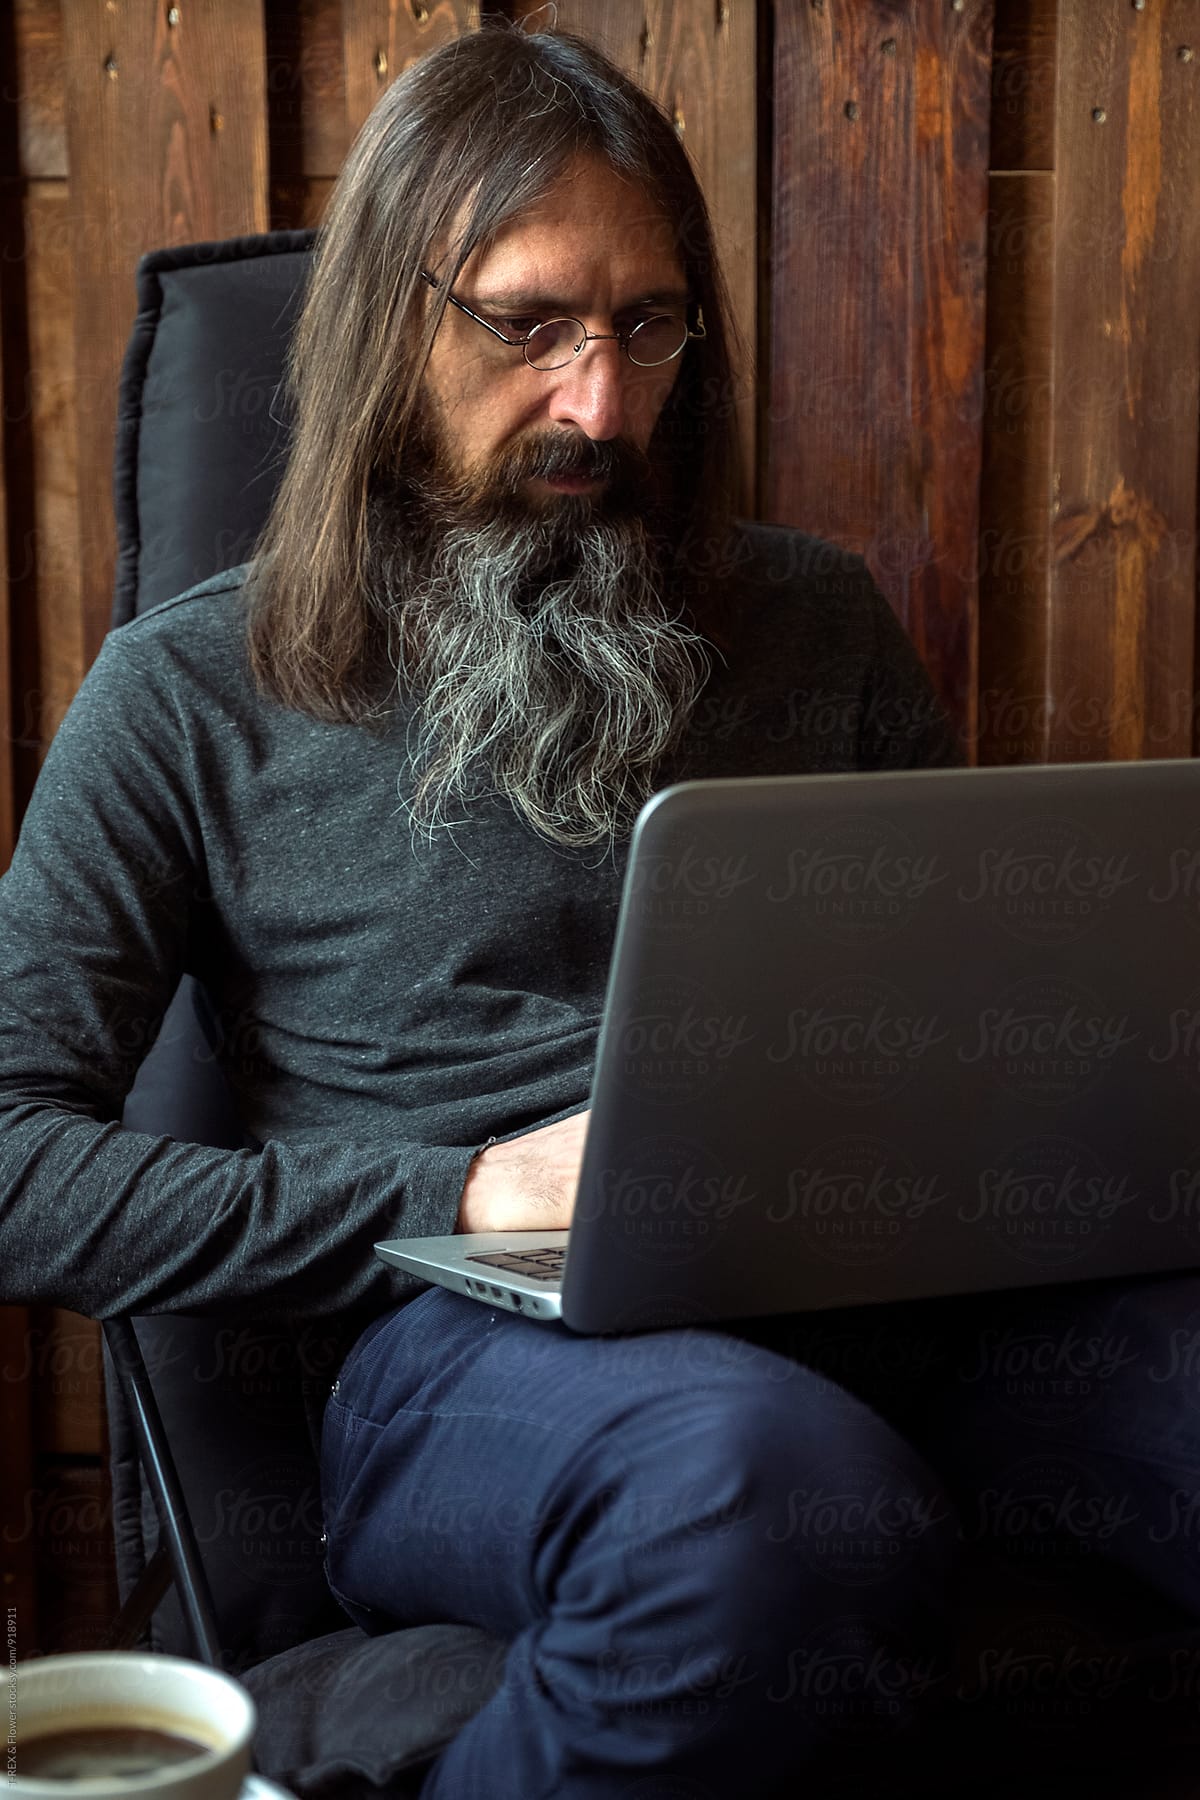 Long haired man sitting on chair while using laptop